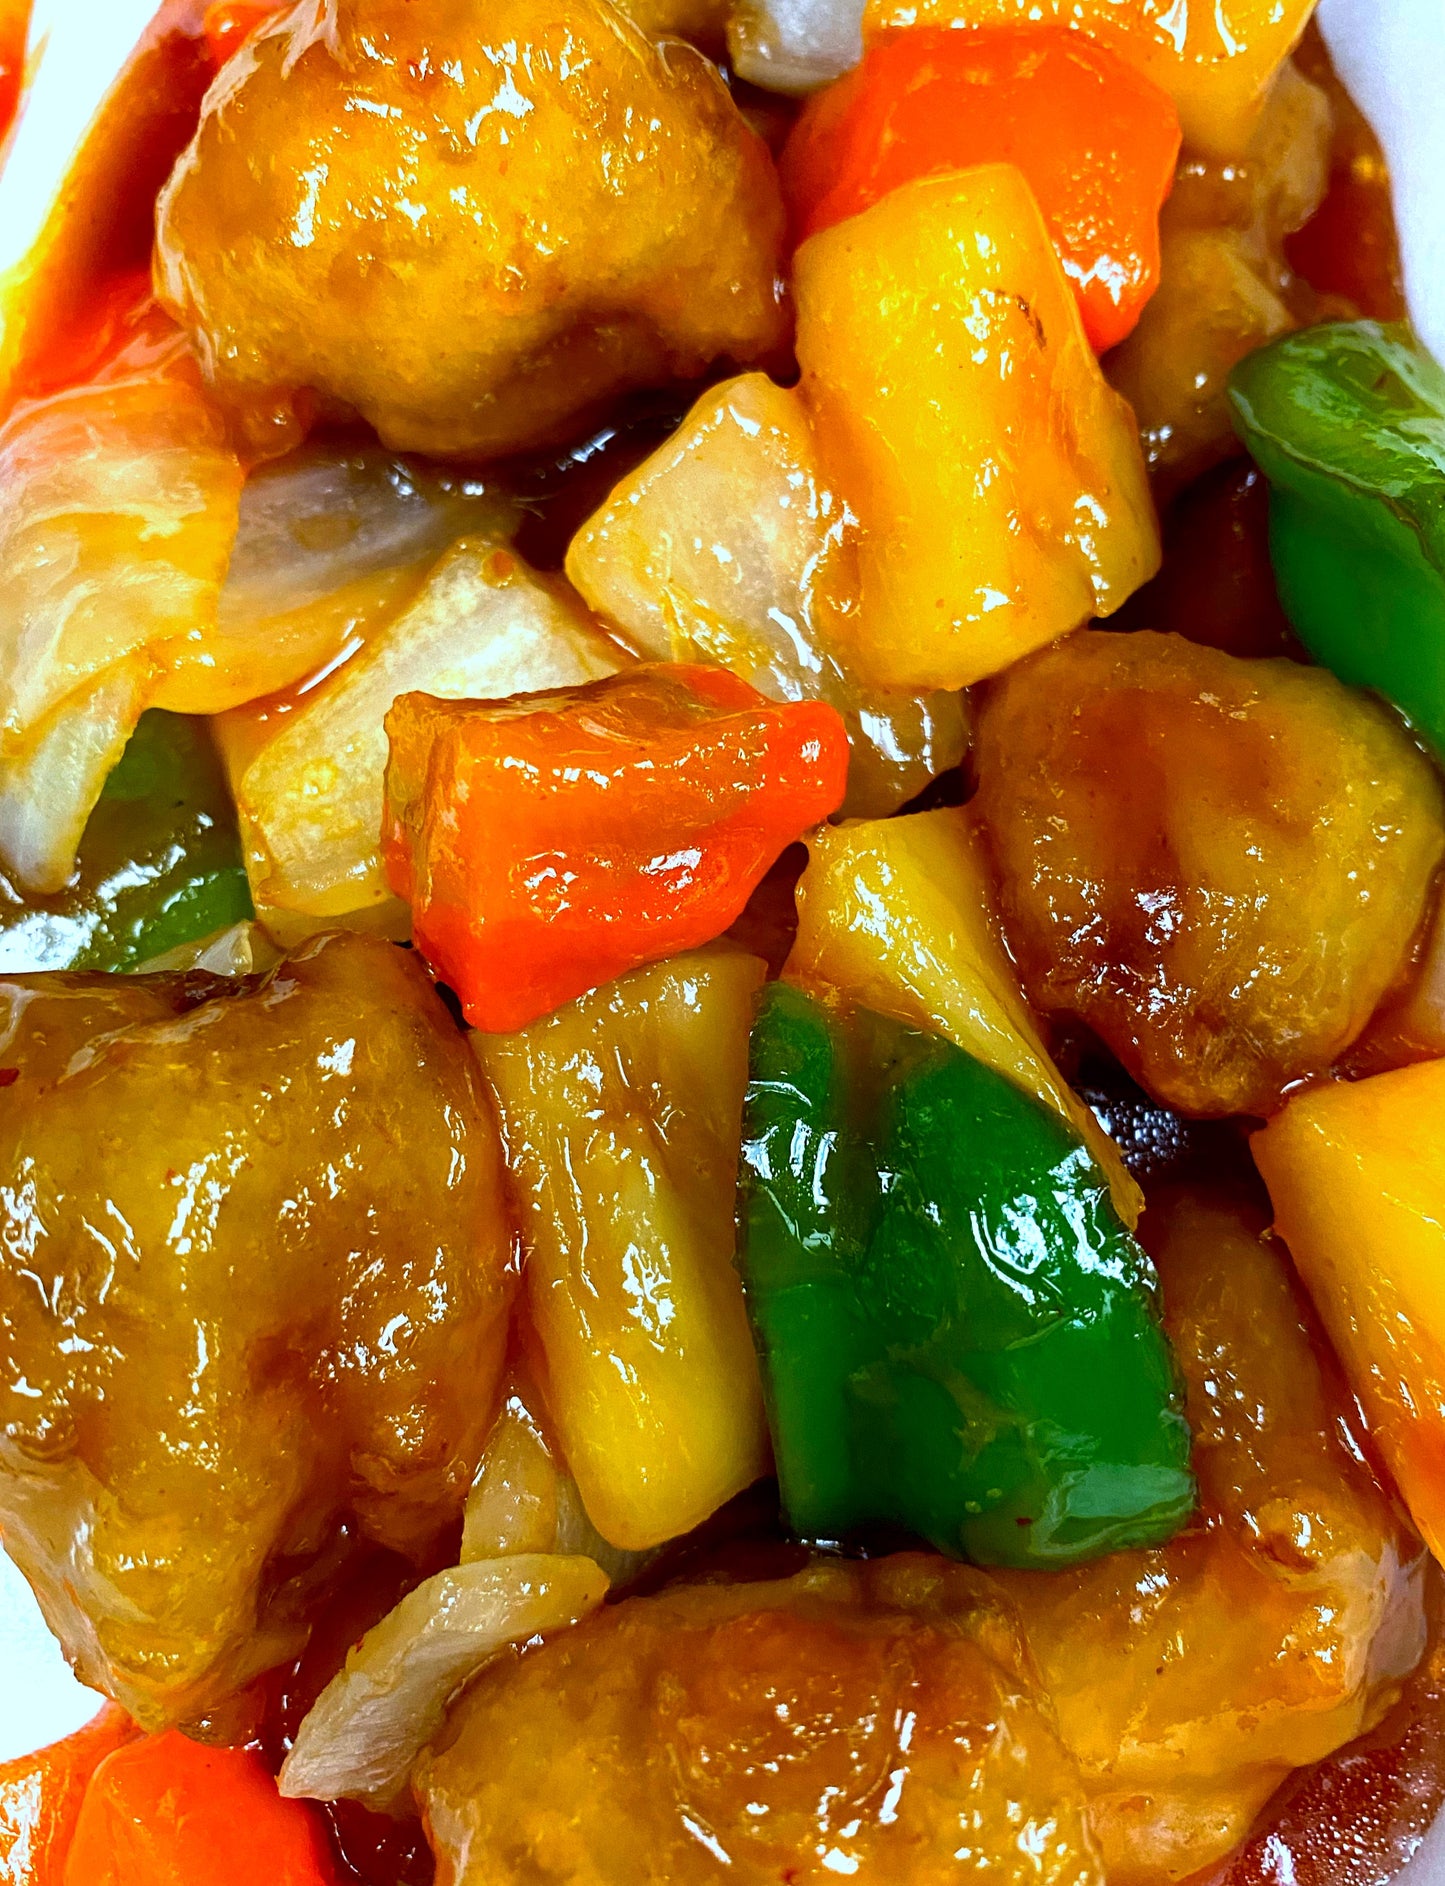 Lunch - Sweet and Sour Pork